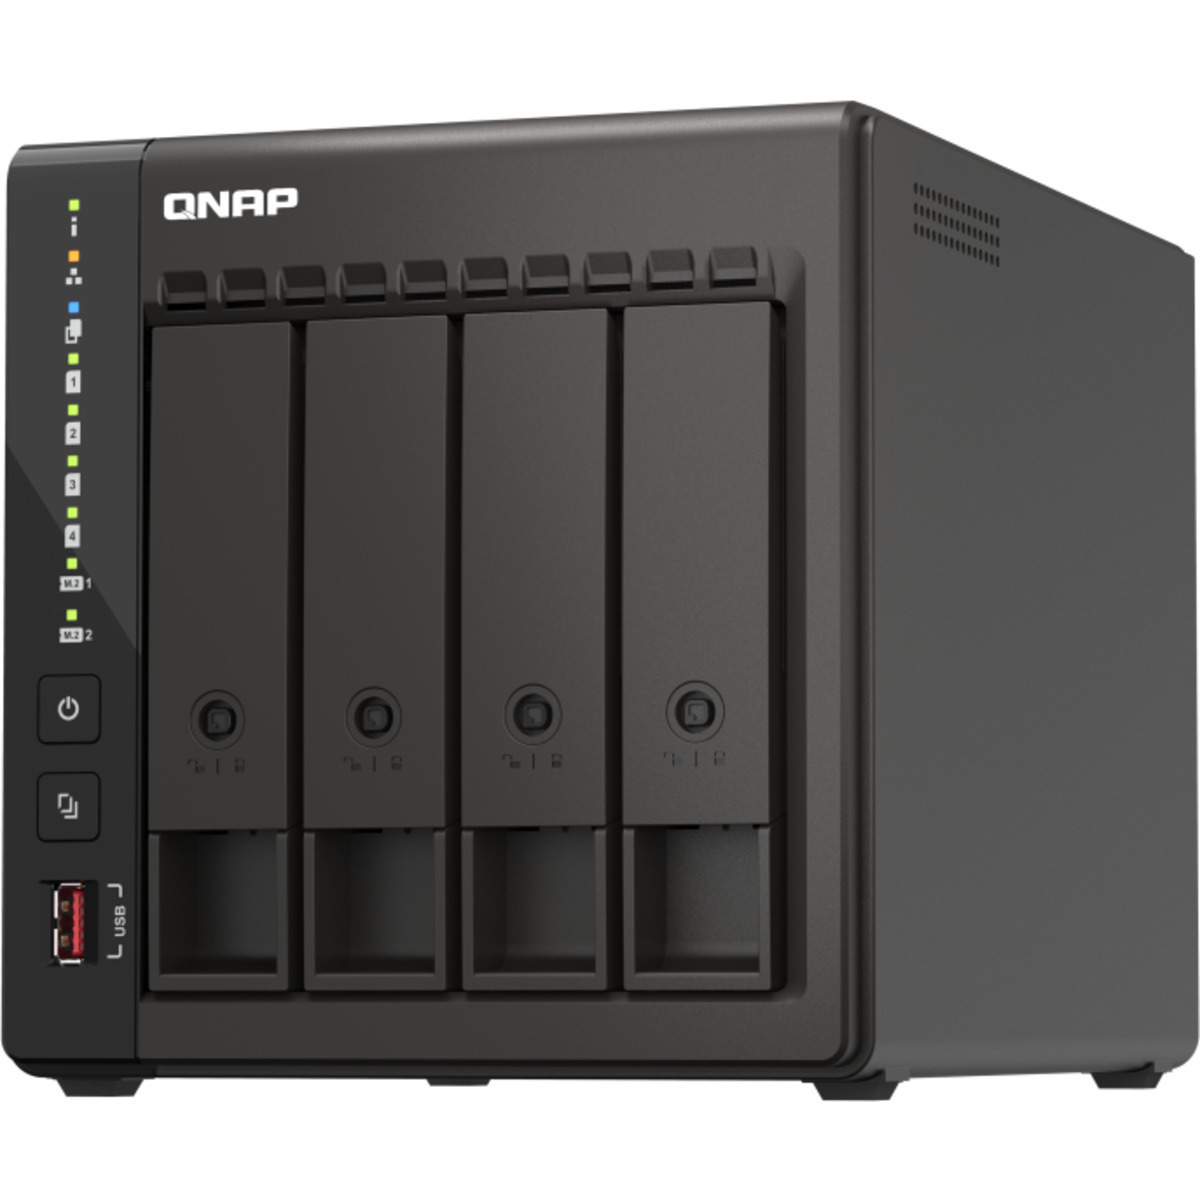 QNAP TS-453E 6tb 4-Bay Desktop Multimedia / Power User / Business NAS - Network Attached Storage Device 3x2tb Seagate IronWolf Pro ST2000NT001 3.5 7200rpm SATA 6Gb/s HDD NAS Class Drives Installed - Burn-In Tested TS-453E